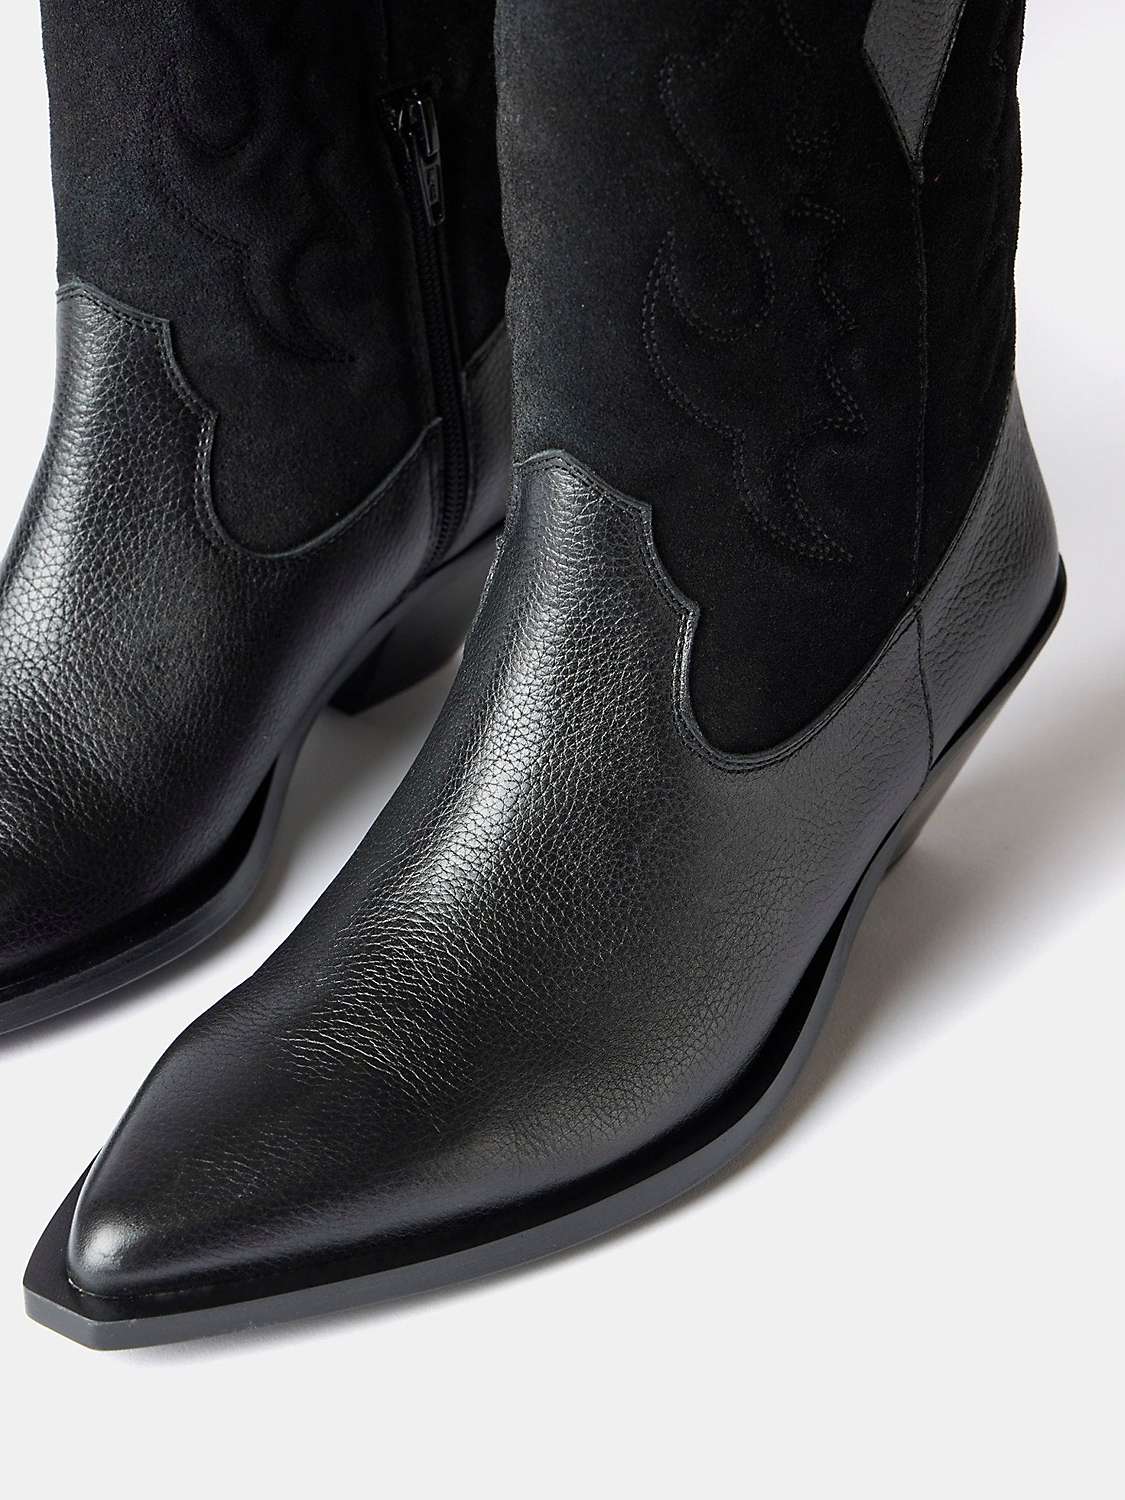 Buy Mint Velvet Leather and Suede Stitching Detail Cowboy Boots, Black Online at johnlewis.com